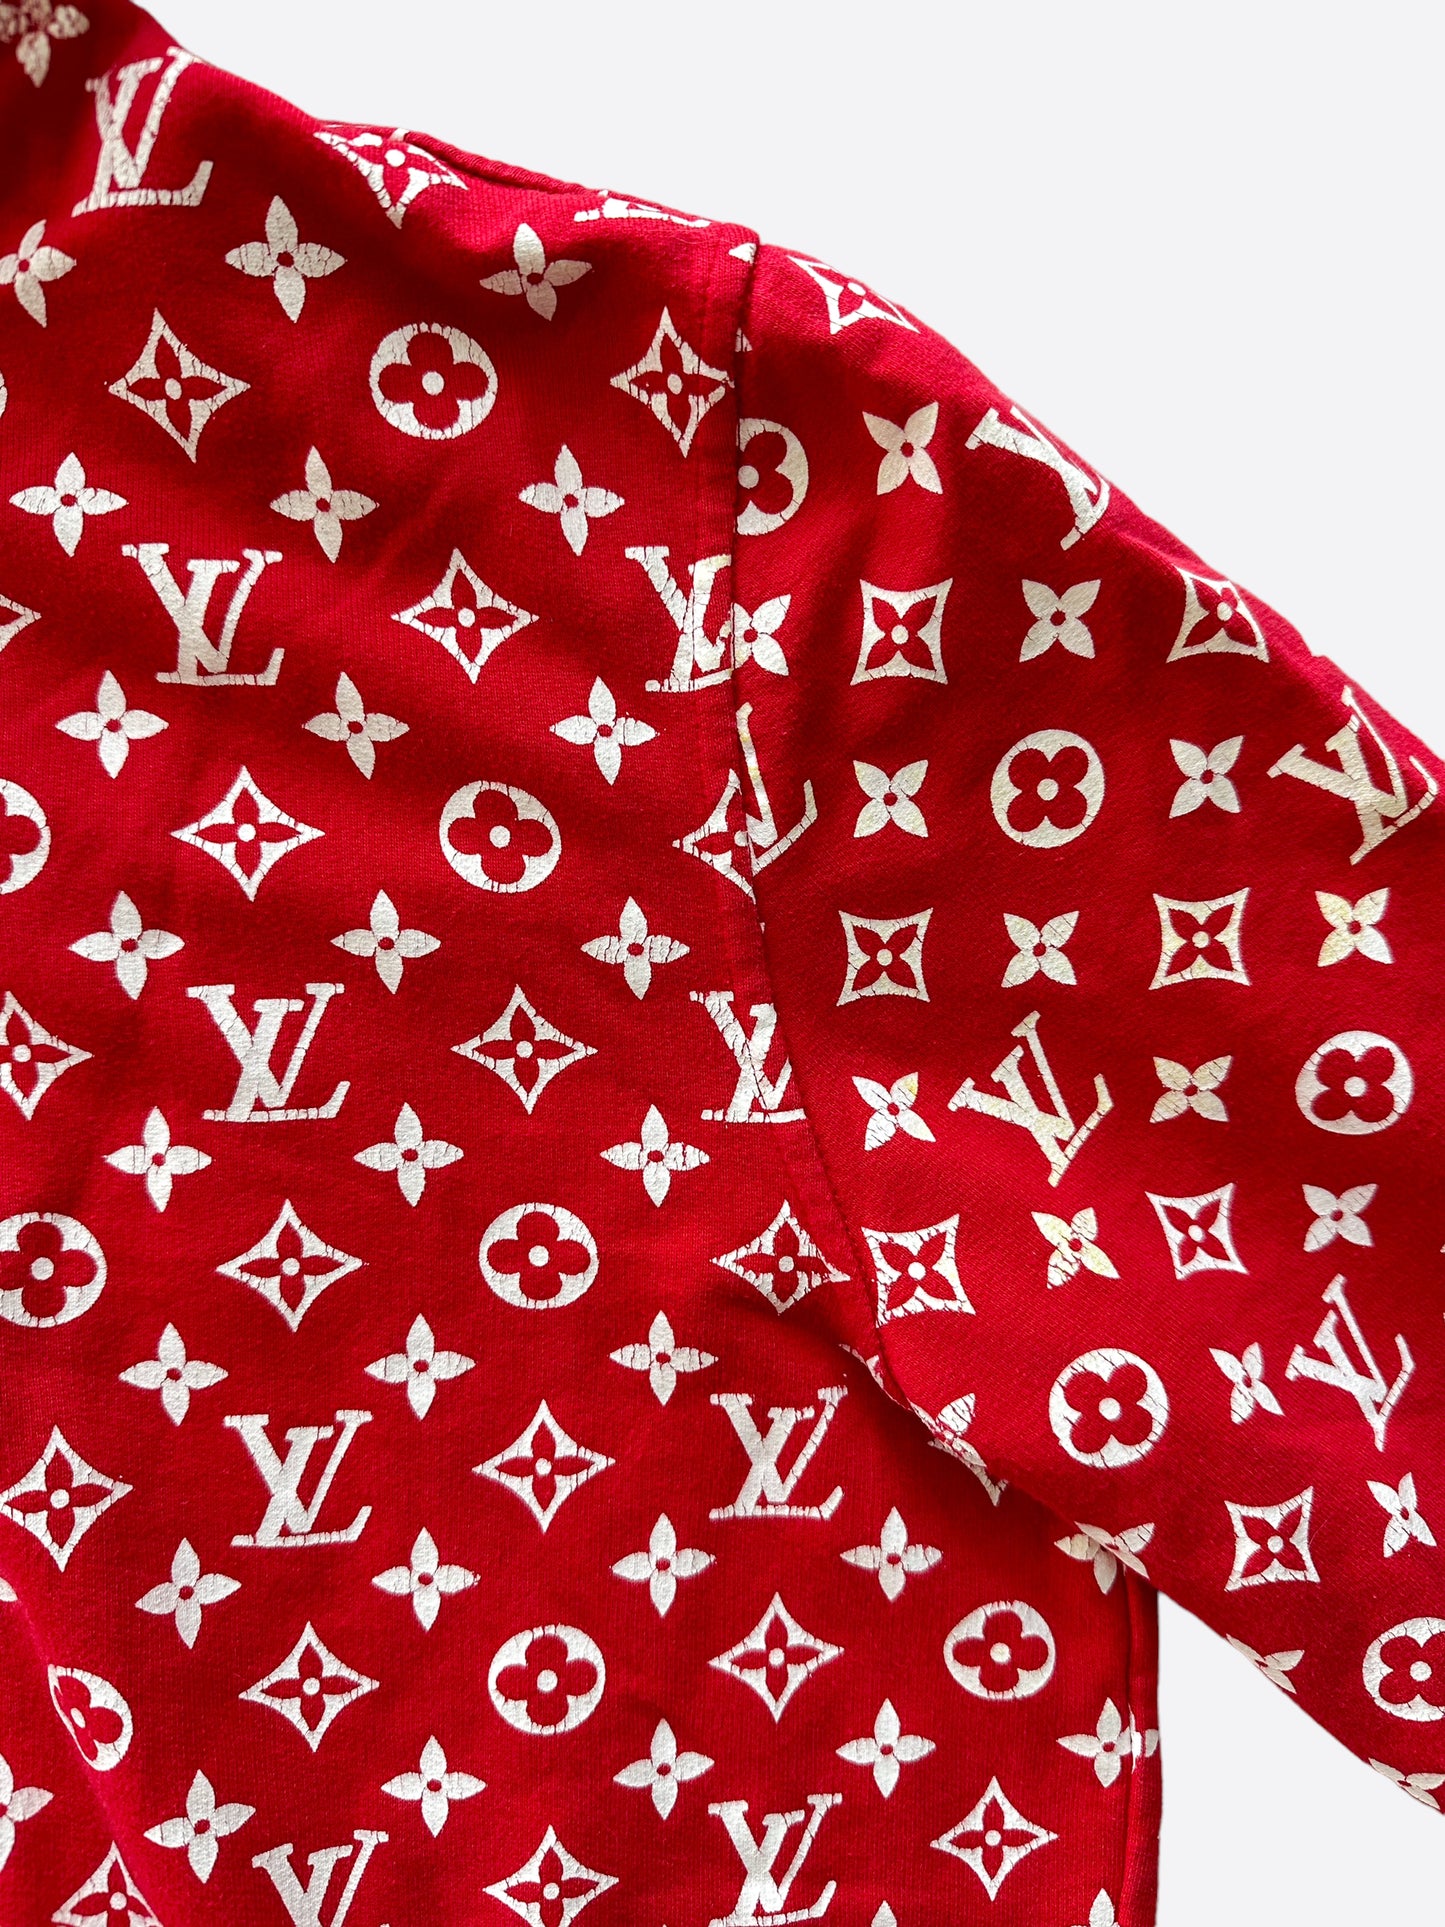 Supreme Louis Vuitton Red Monogram With Snoopy Heavyweight Pullover Hoodie  Sweatshirt - Shop trending fashion in USA and EU